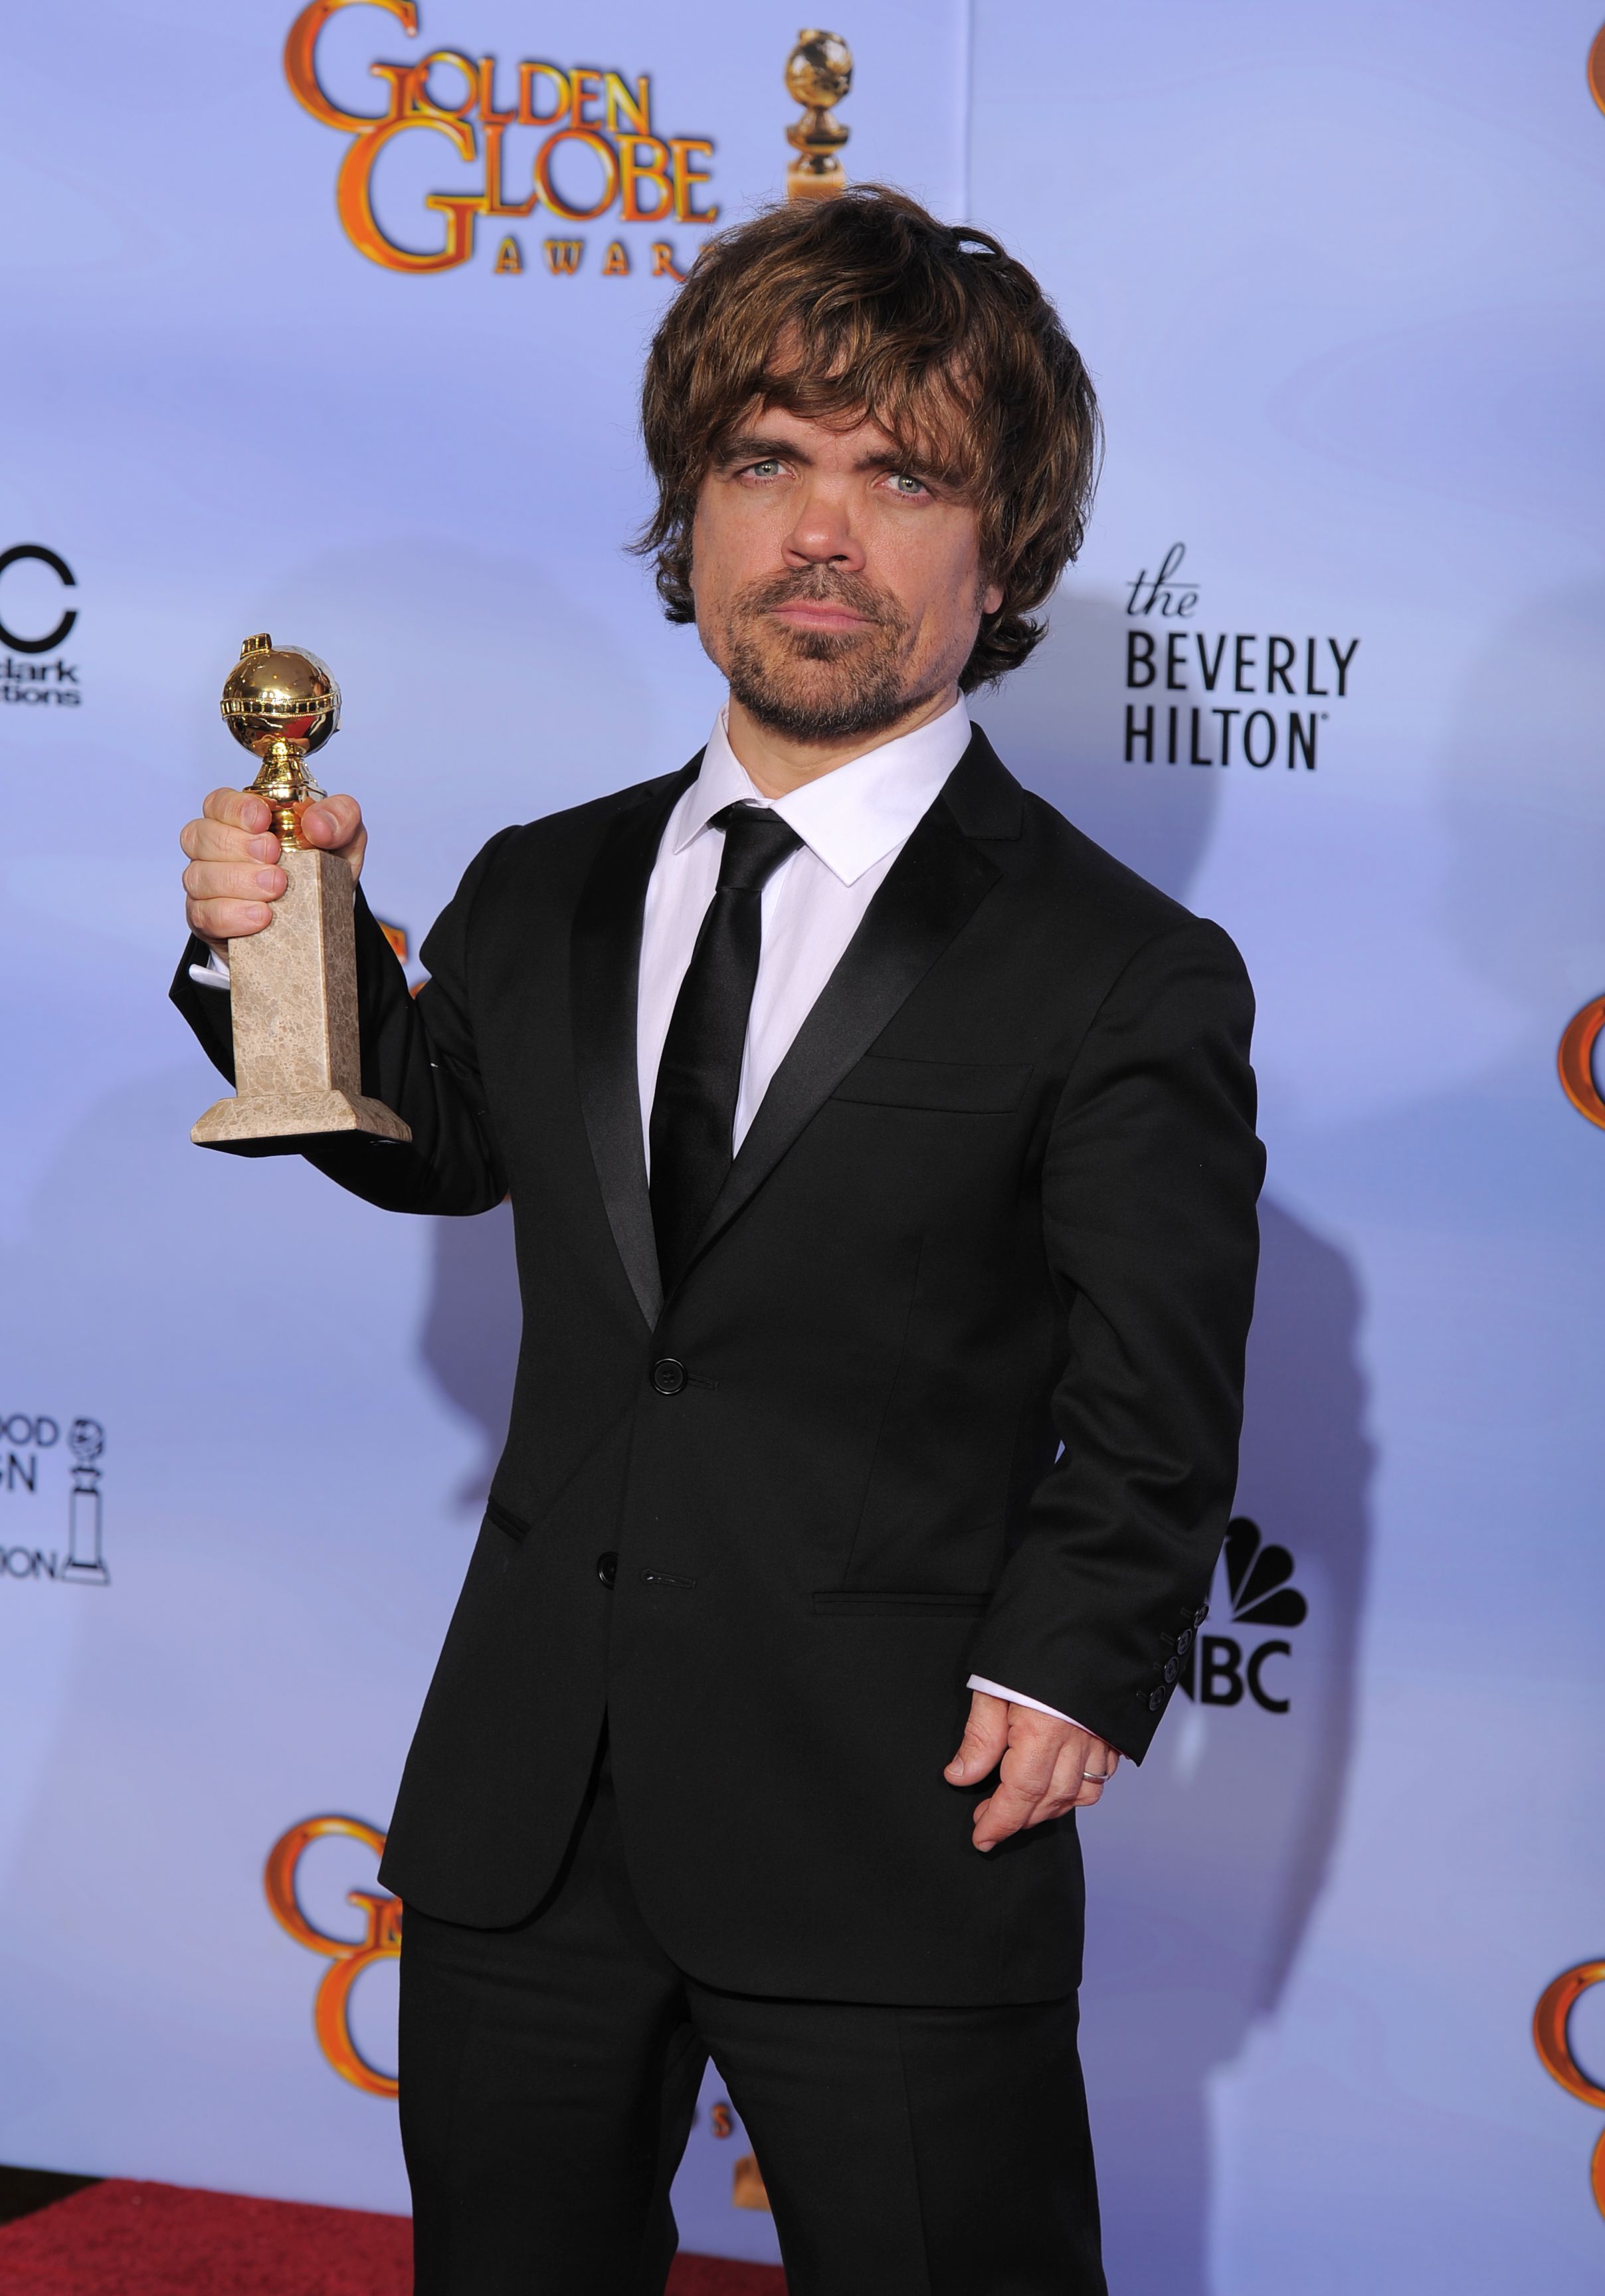 Peter Dinklage wins the Golden Globe for Best Supporting Actor